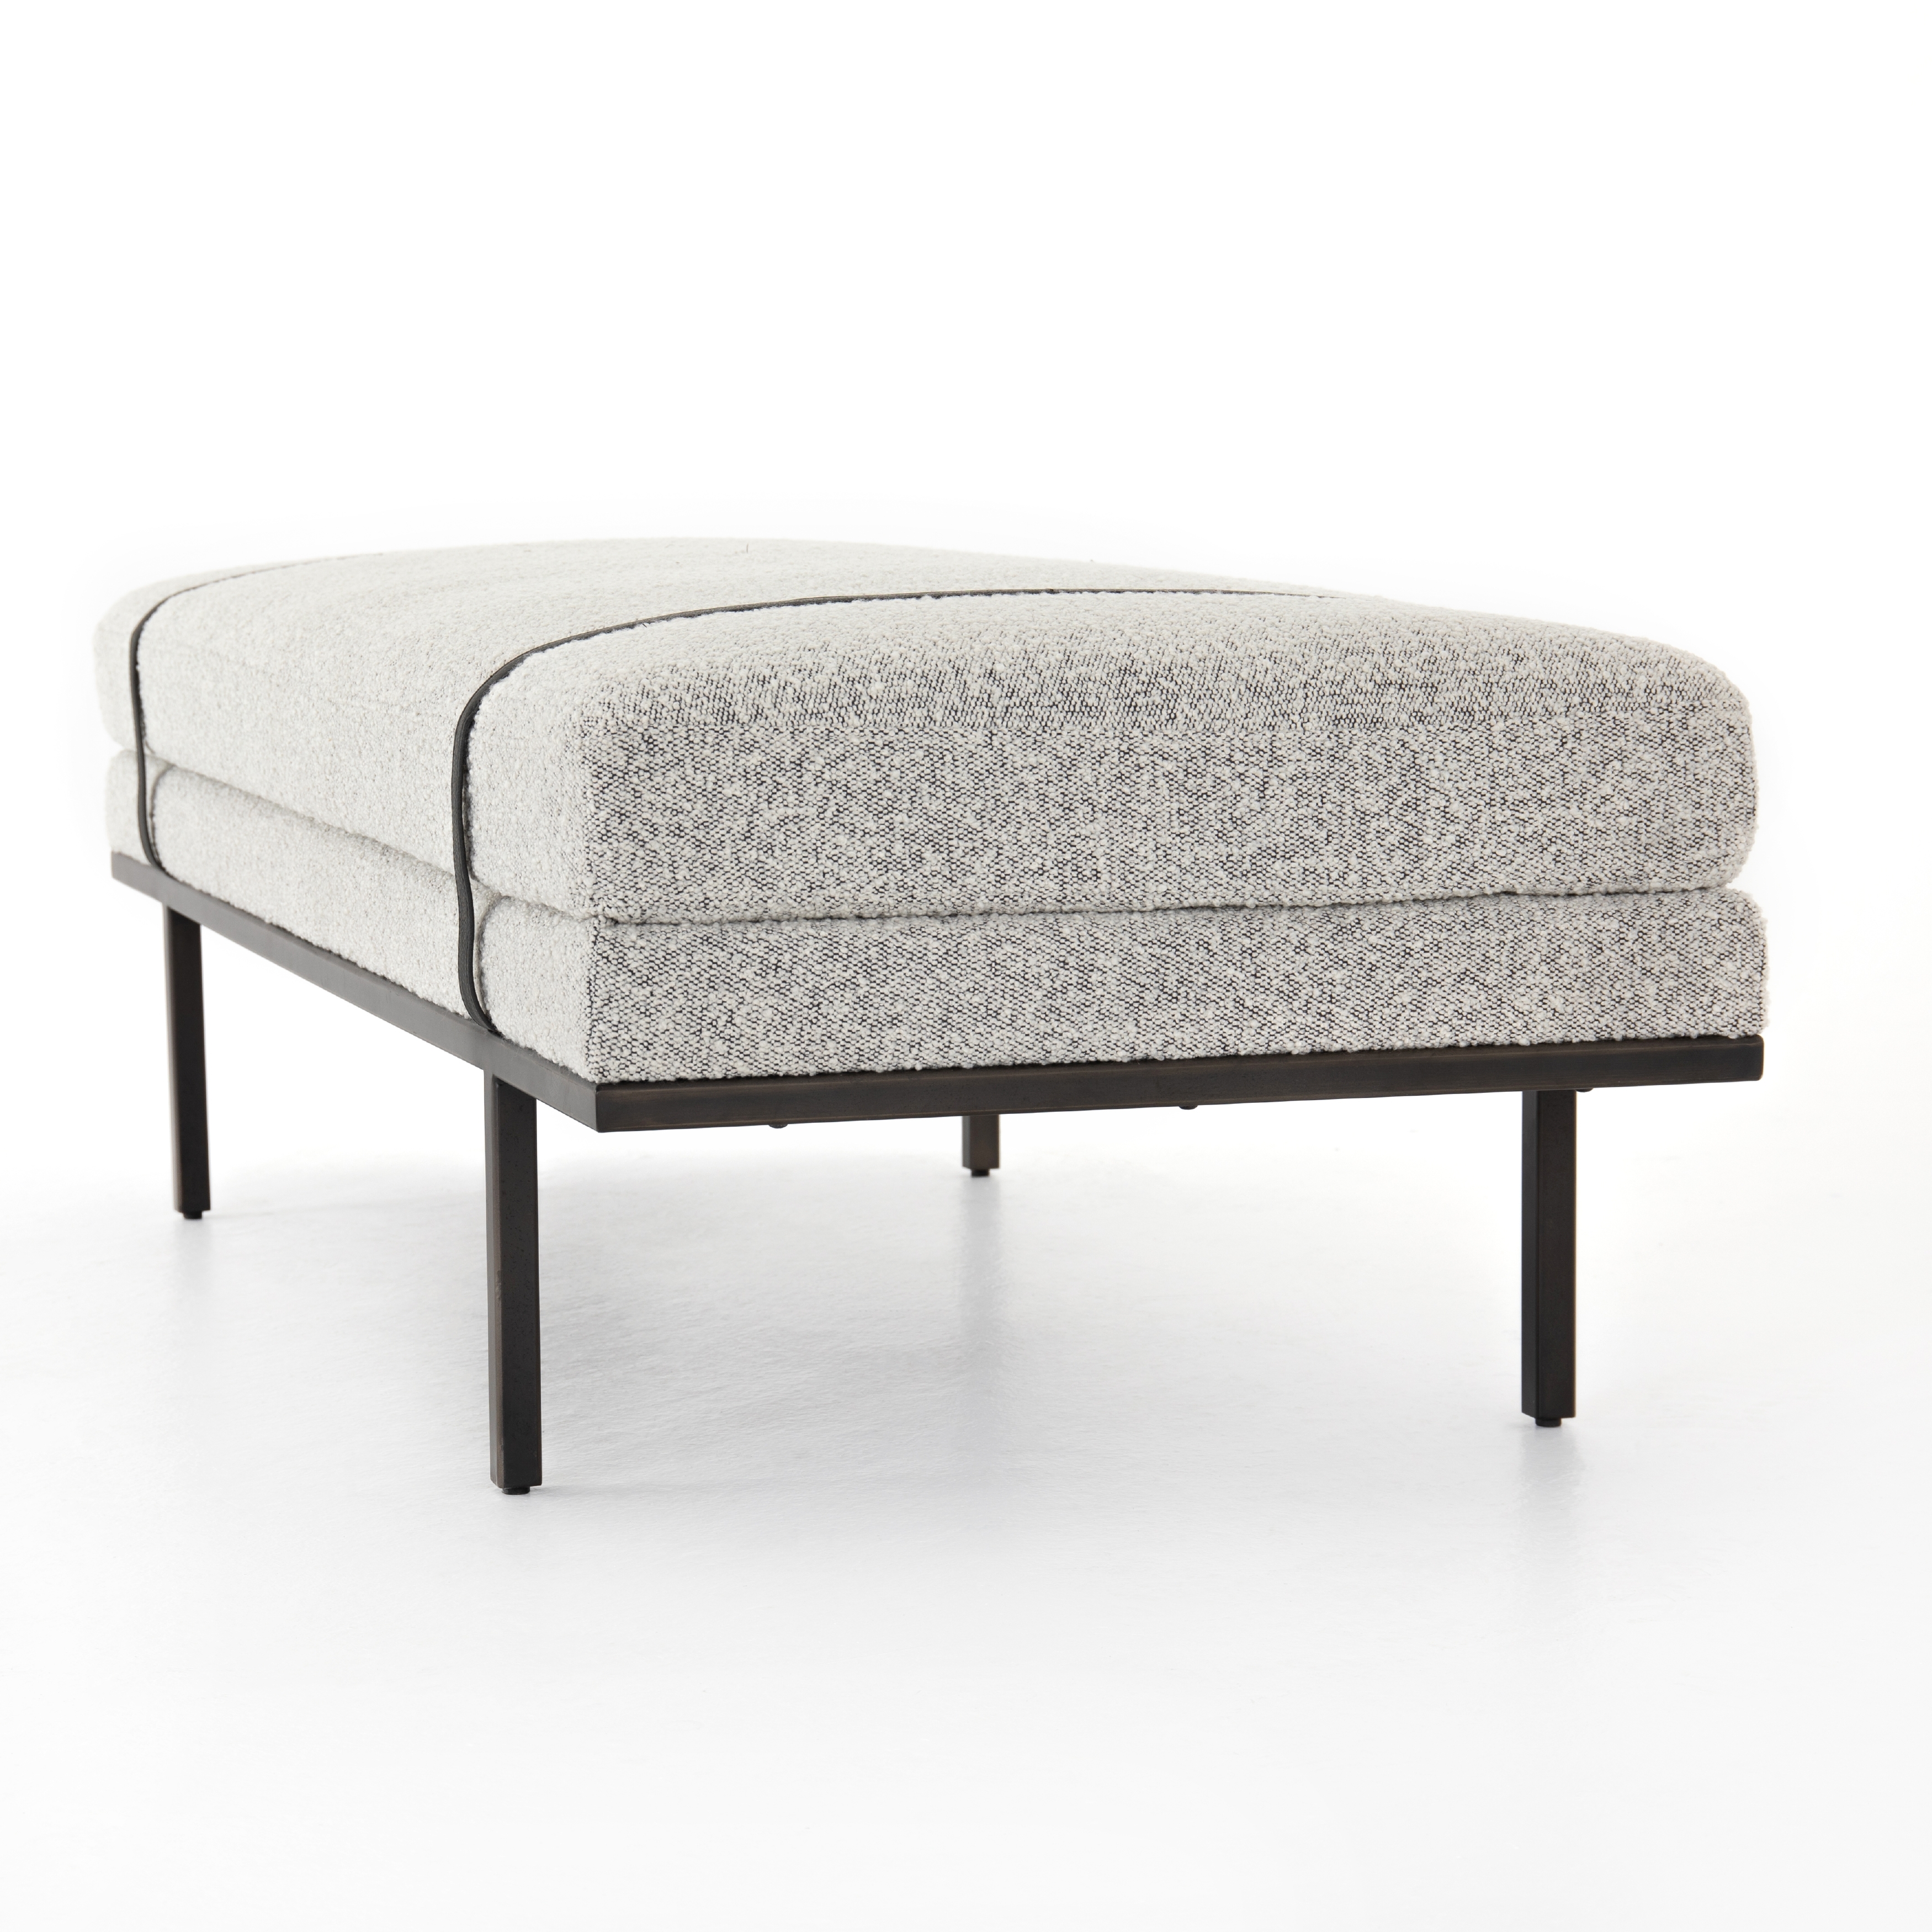 Harris Accent Bench-Knoll Domino - Image 3